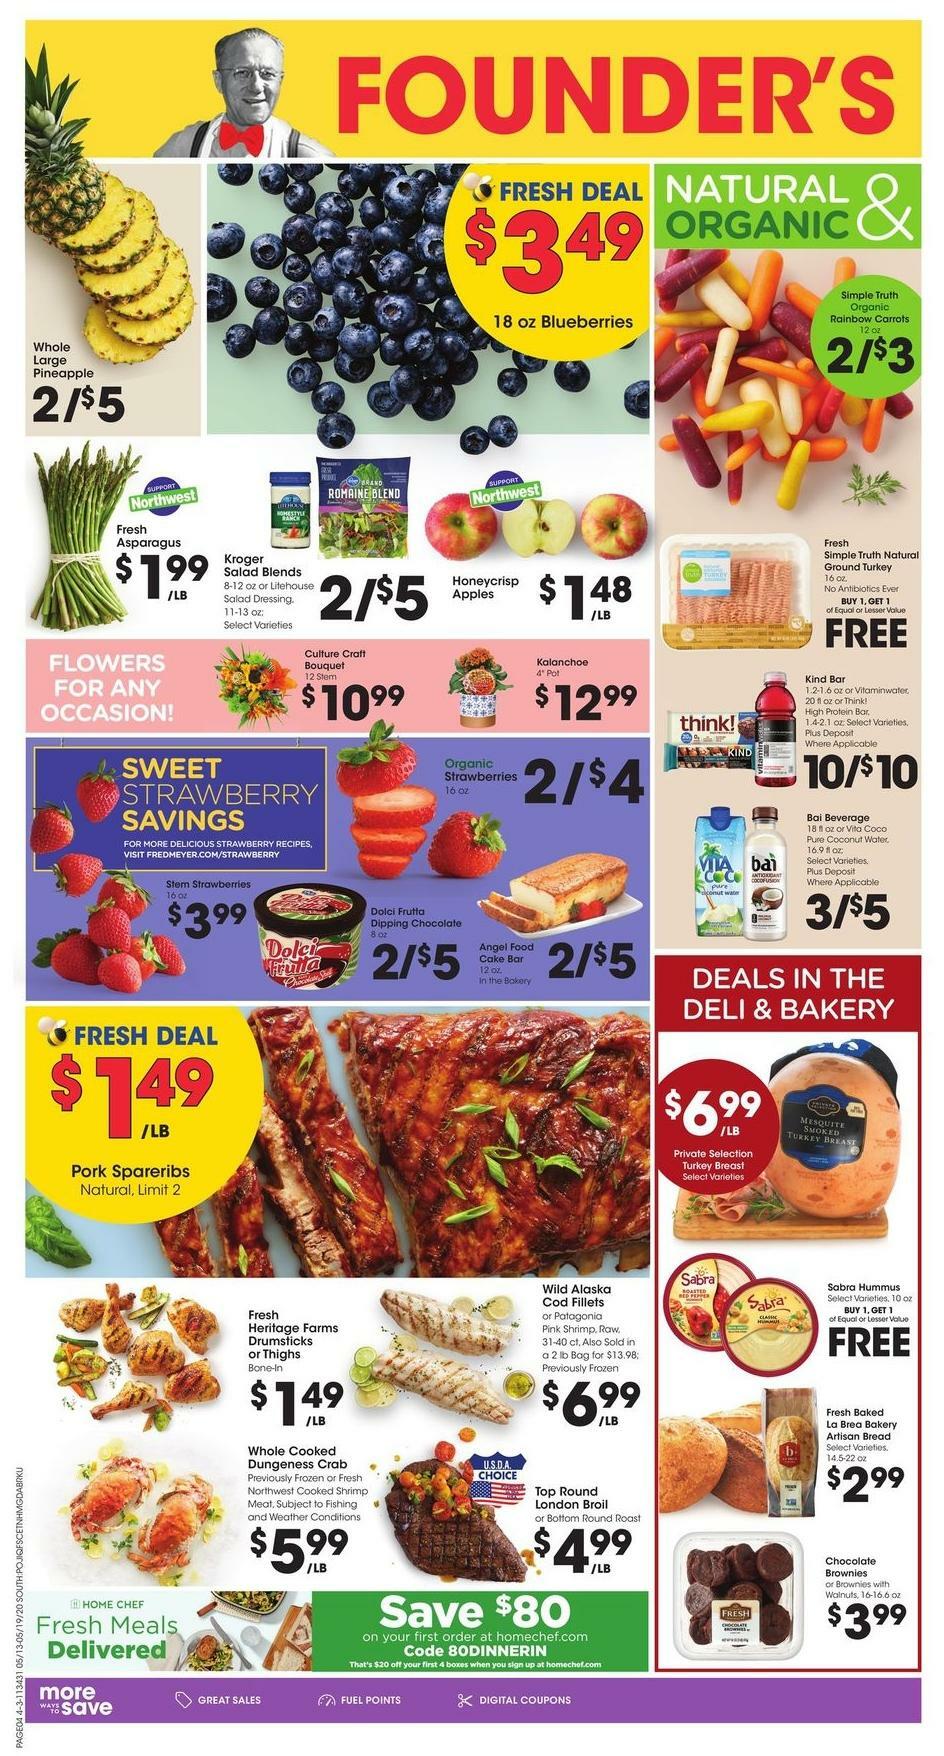 Fred Meyer Founder's Day Sale Weekly Ad & Specials from May 13 Page 4